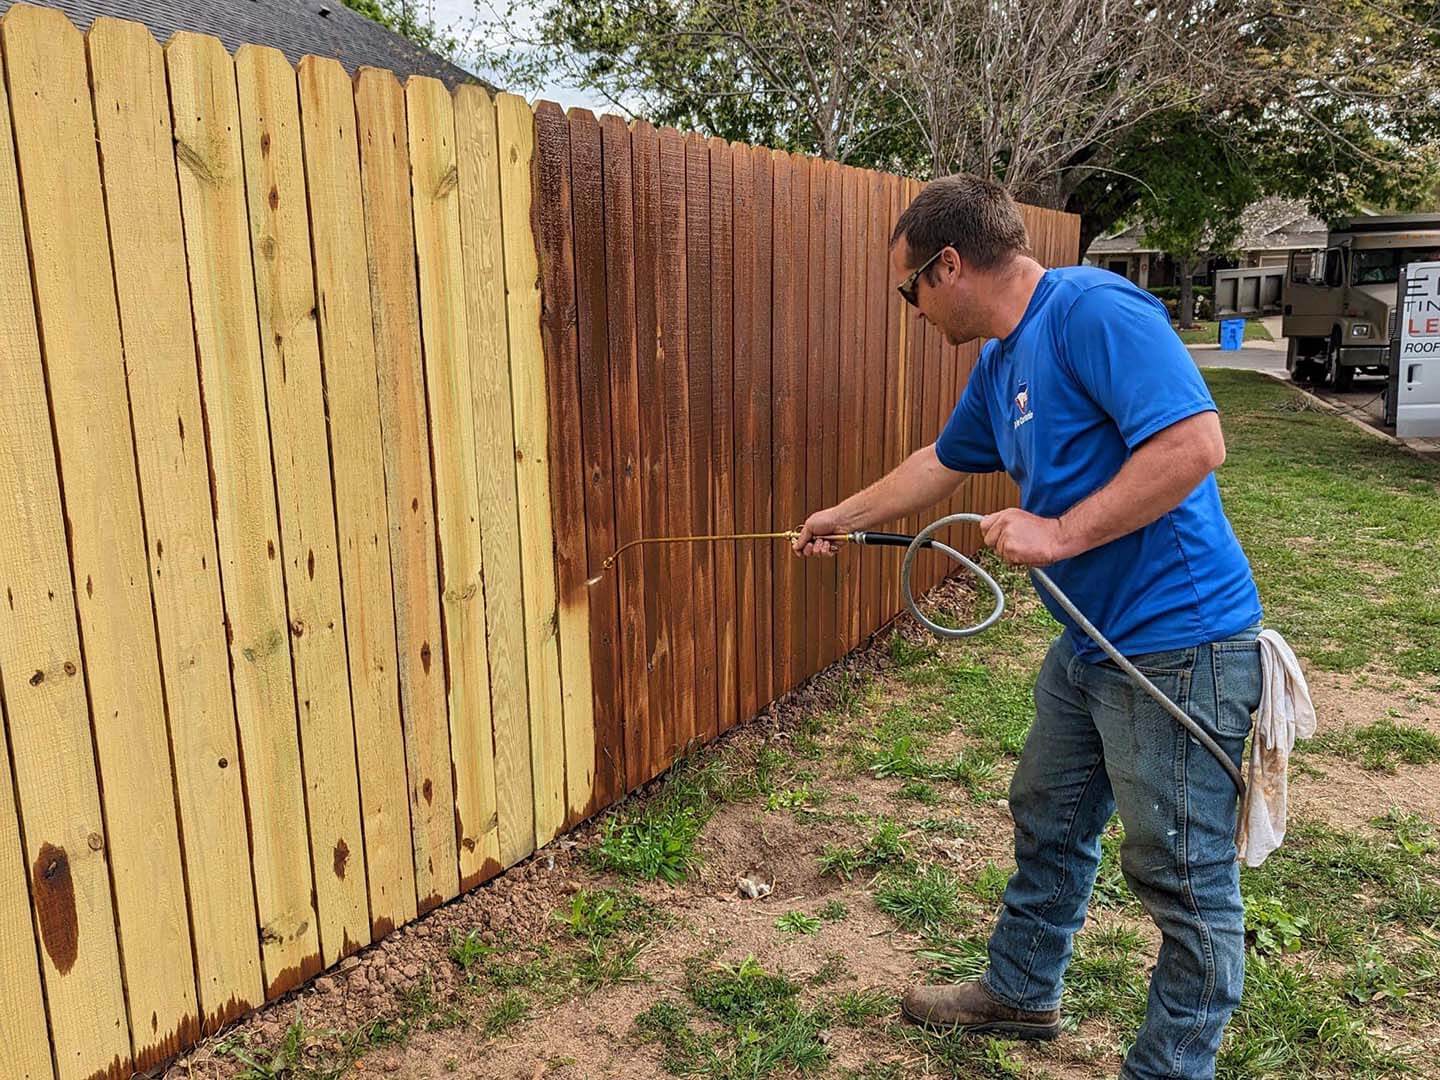 Cleaning and restoration of wood fences, decks, and outdoor structures with stain and seal in Bastrop Texas